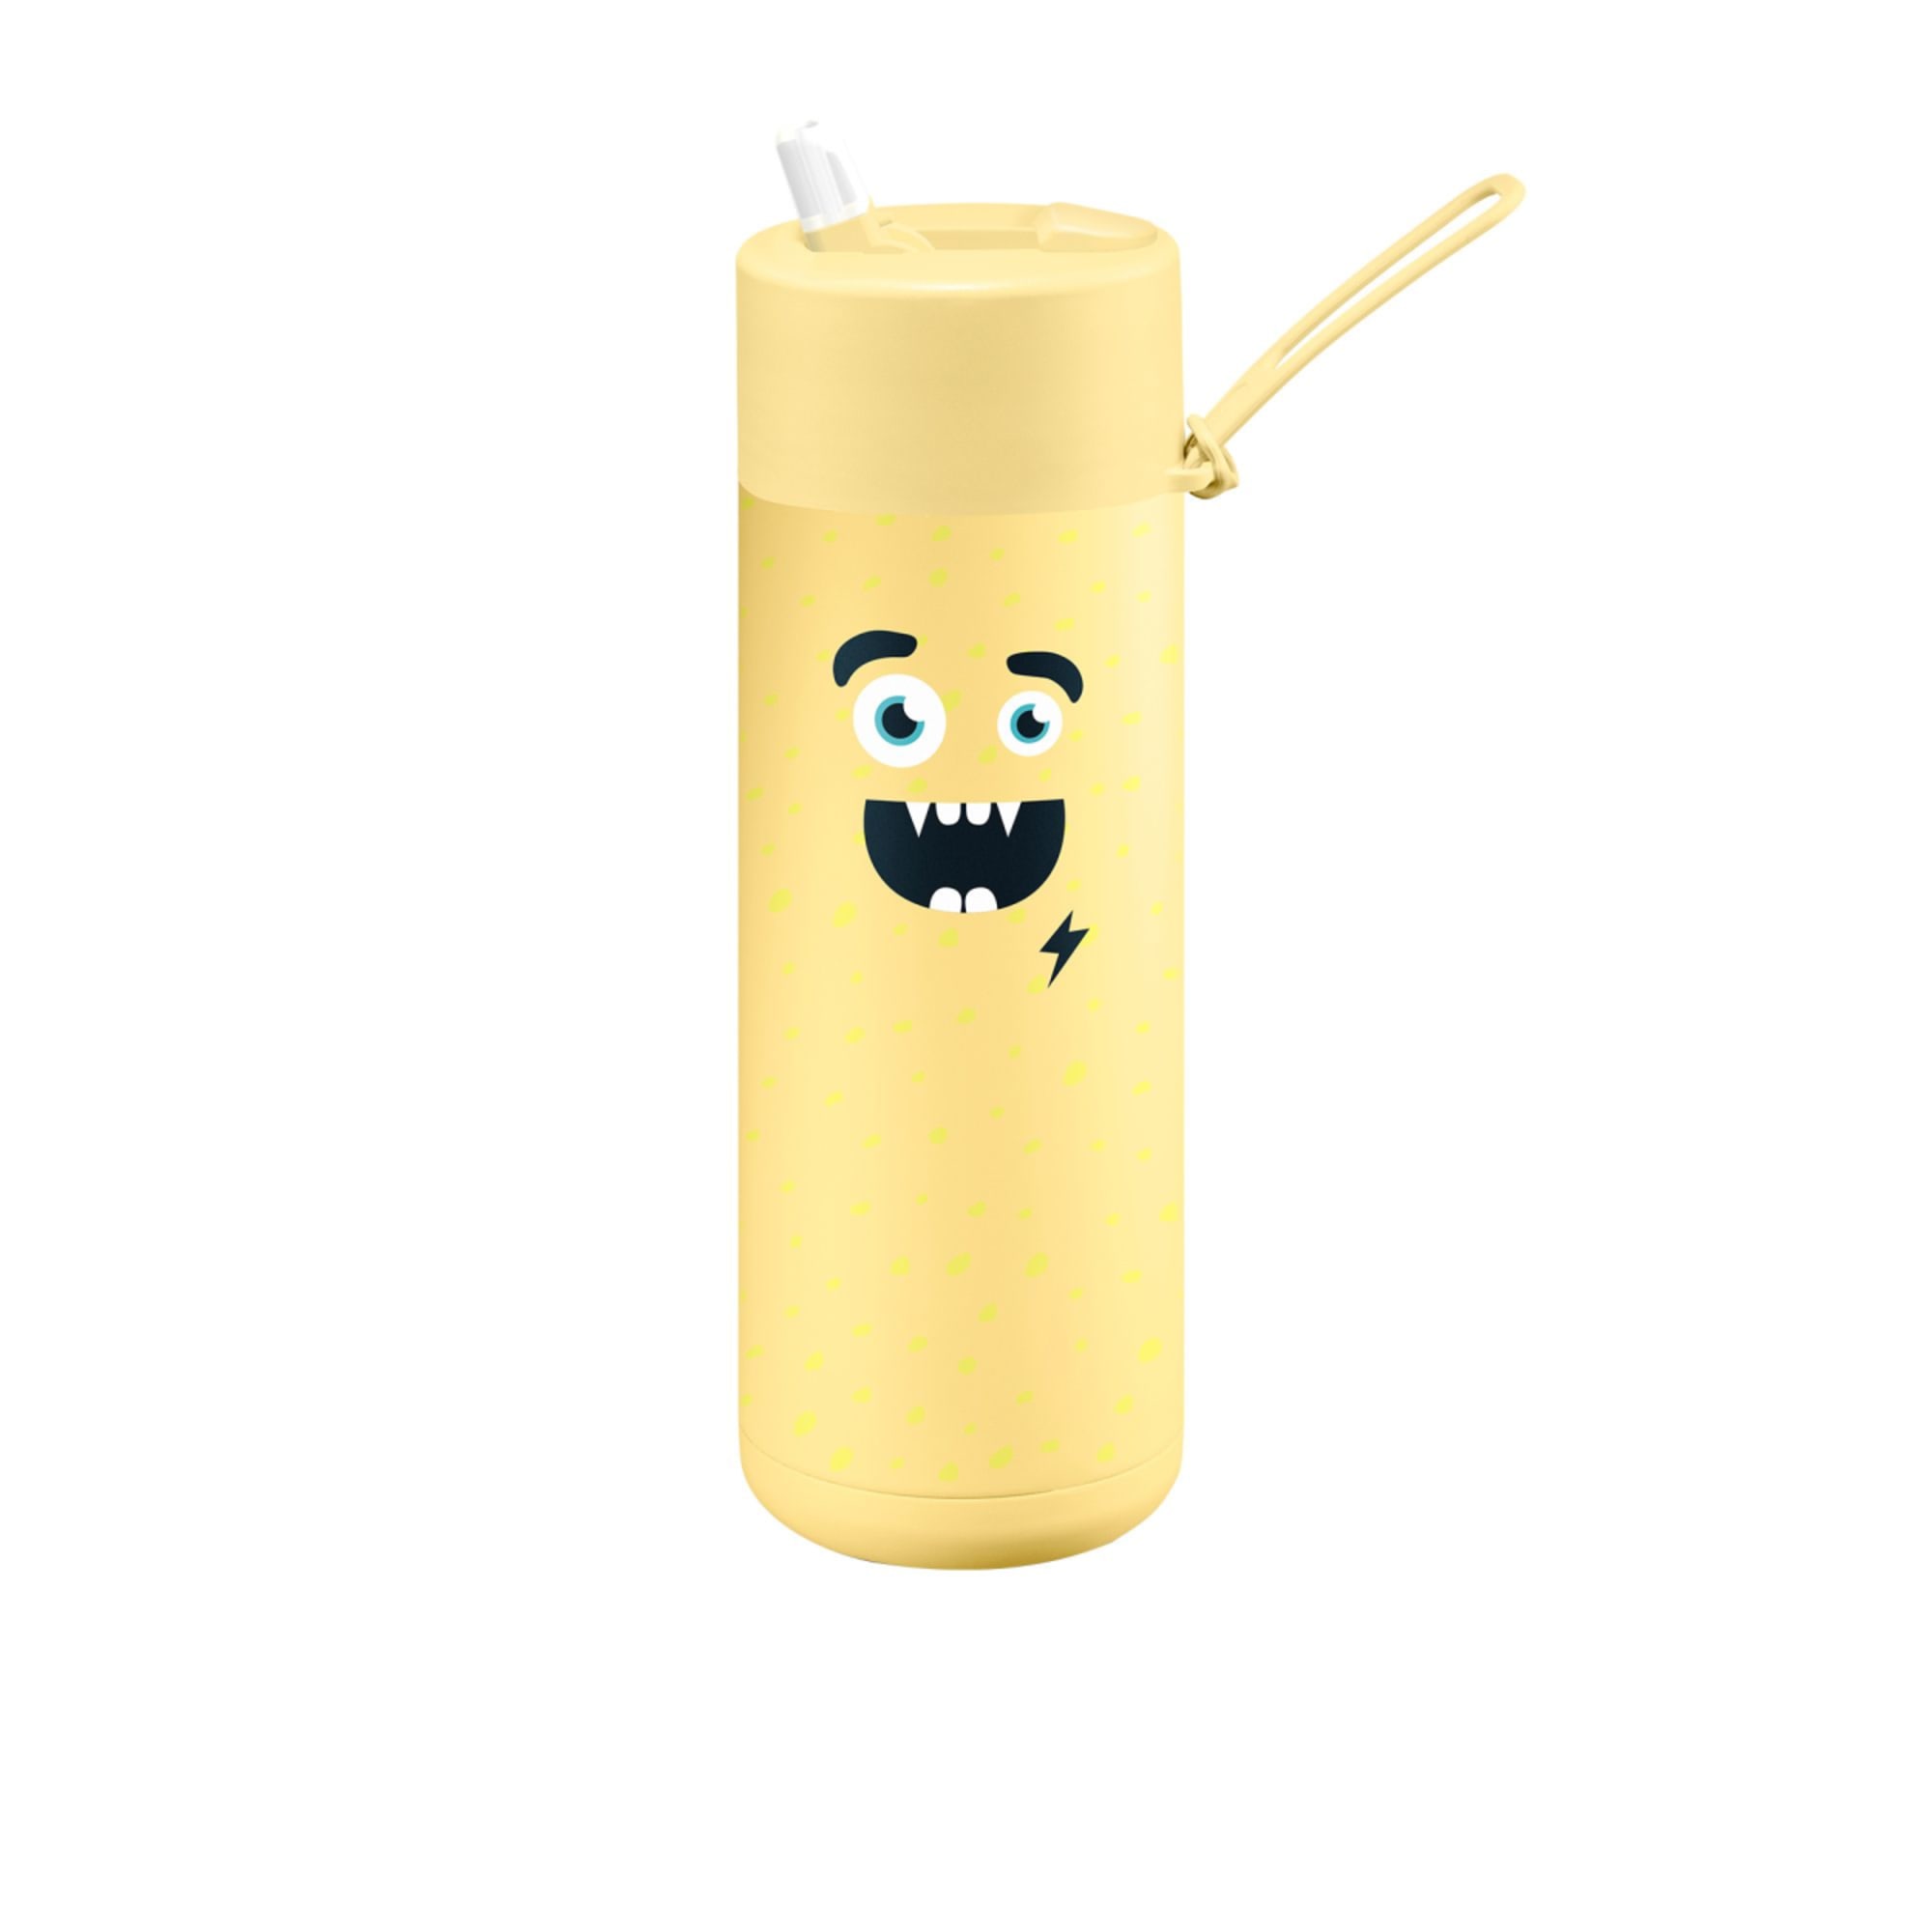 https://res.cloudinary.com/kitchenwarehouse/image/upload/c_fill,g_face,w_1250/f_auto/t_PDP_2000x2000/Supplier%20Images%20/2000px/Frank-Green-Franksters-Reusable-Bottle-with-Straw-595ml-20oz-Buttermilk-Flo_1_2000px.jpg